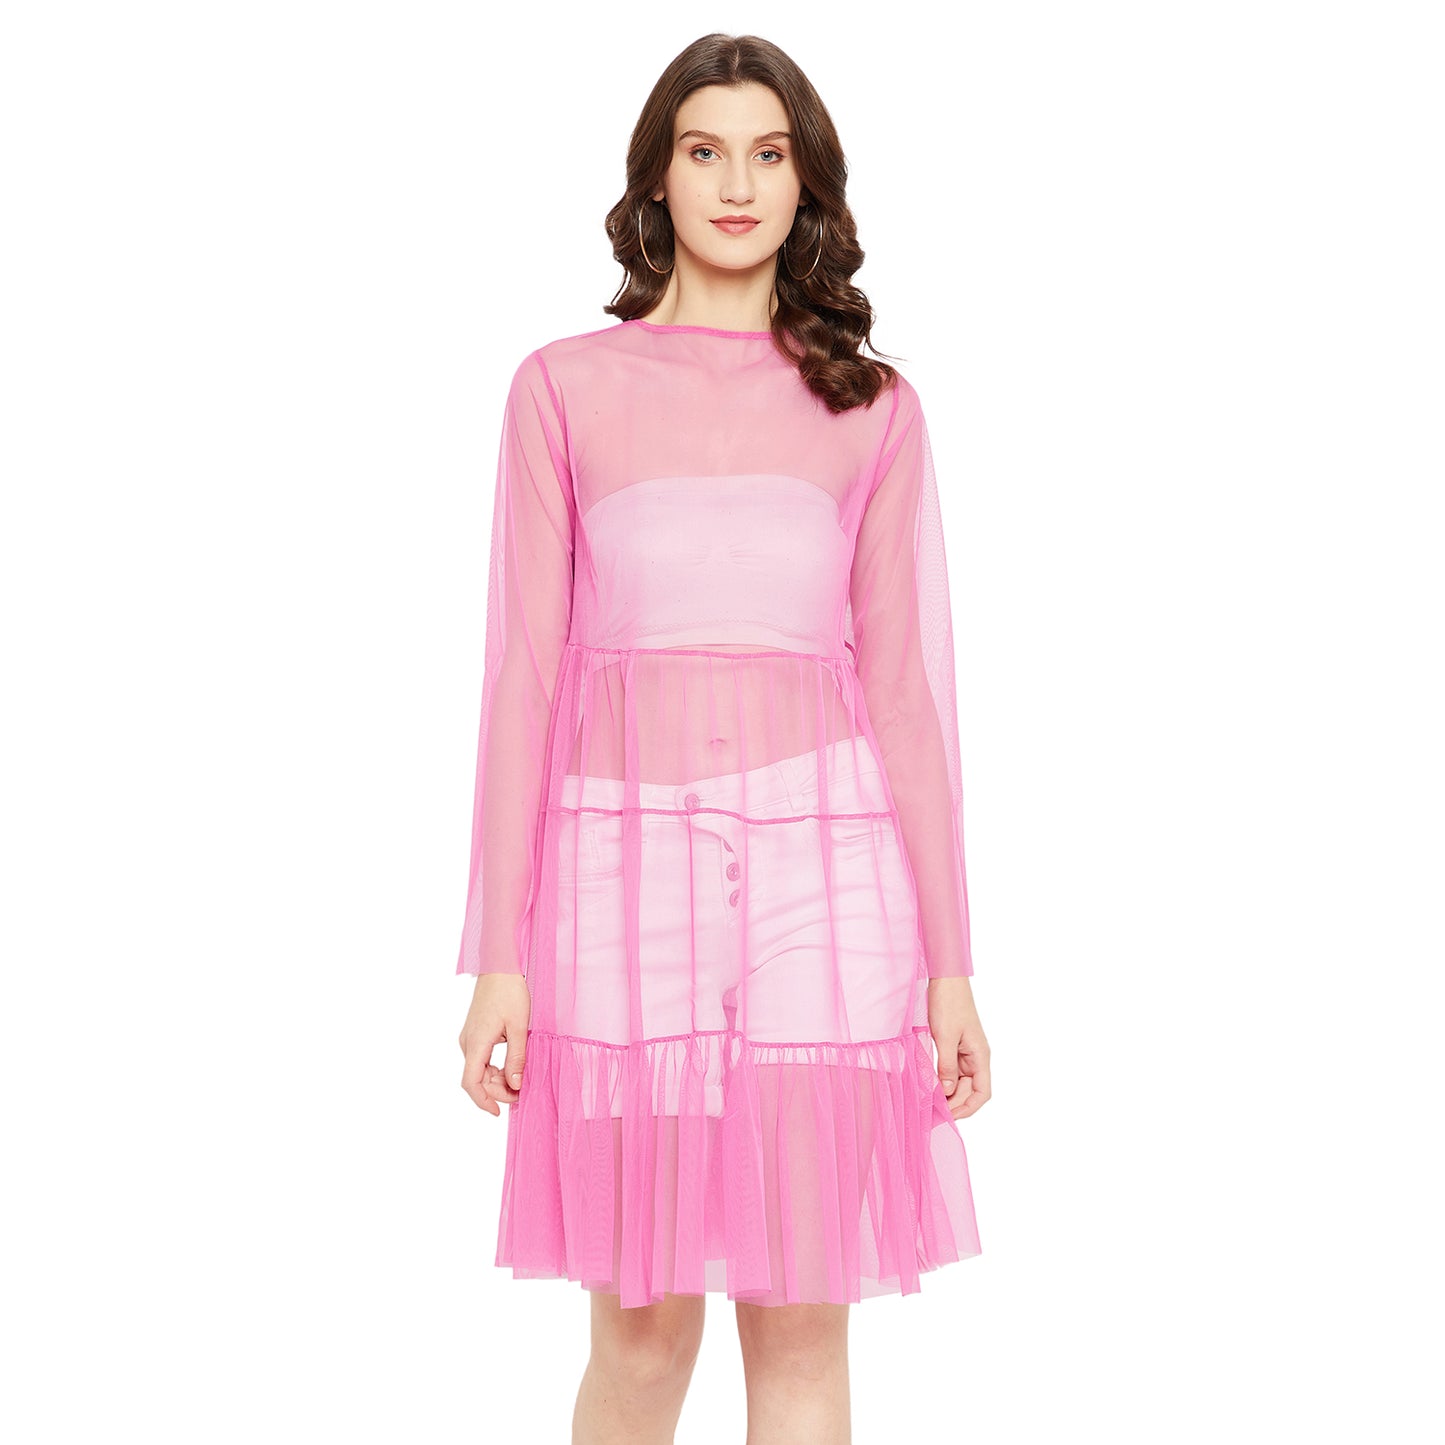 LY2 Fuschia Net Dress with Bell Sleeves